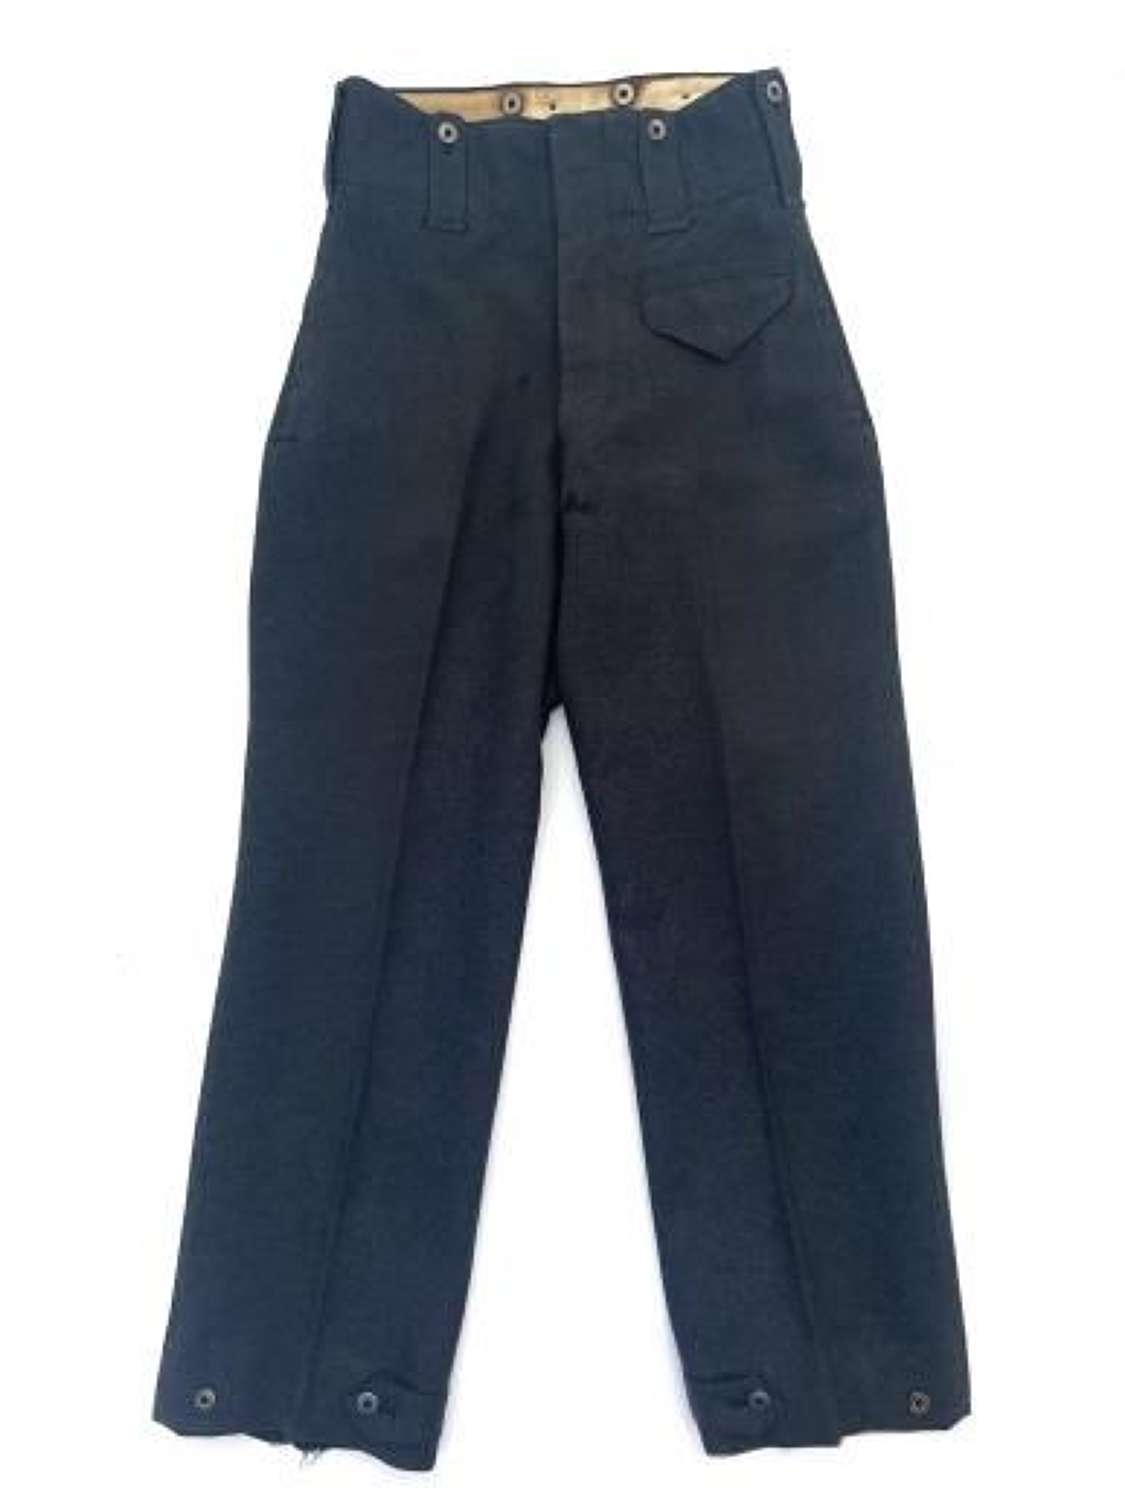 Original 1942 Dated RCAF Suits Aircrew Trousers